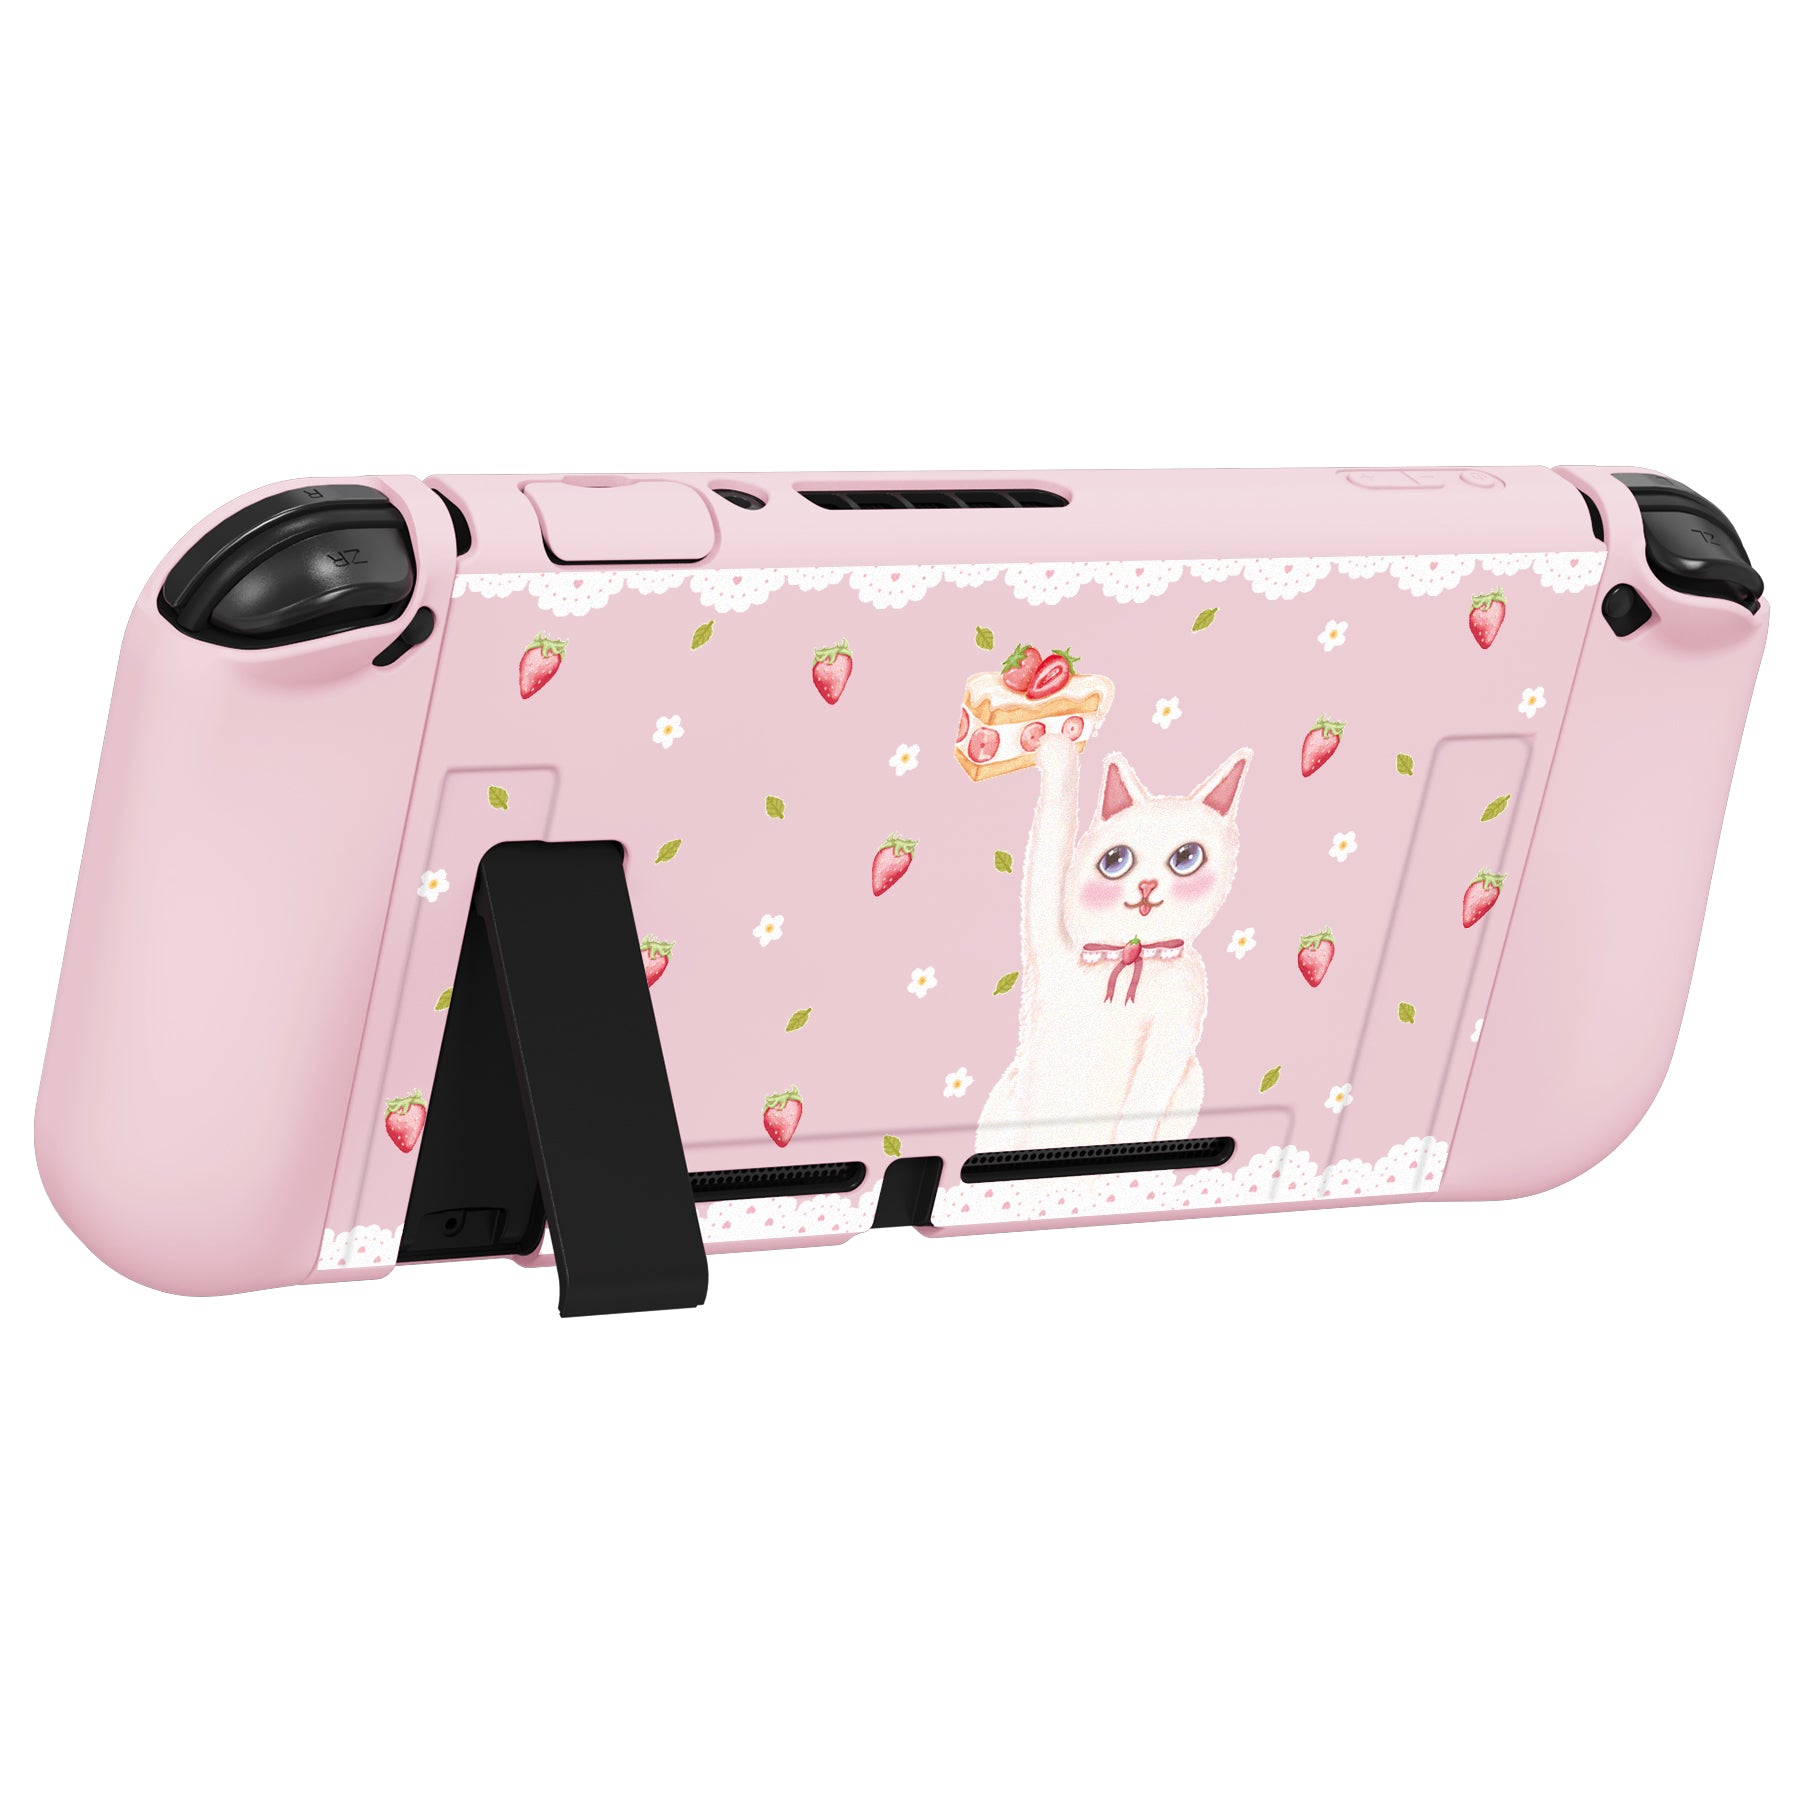 PlayVital ZealProtect Soft Protective Case for Nintendo Switch, Flexible Cover for Switch with Tempered Glass Screen Protector & Thumb Grips & ABXY Direction Button Caps - Tea Time Kitty - RNSYV6032 playvital